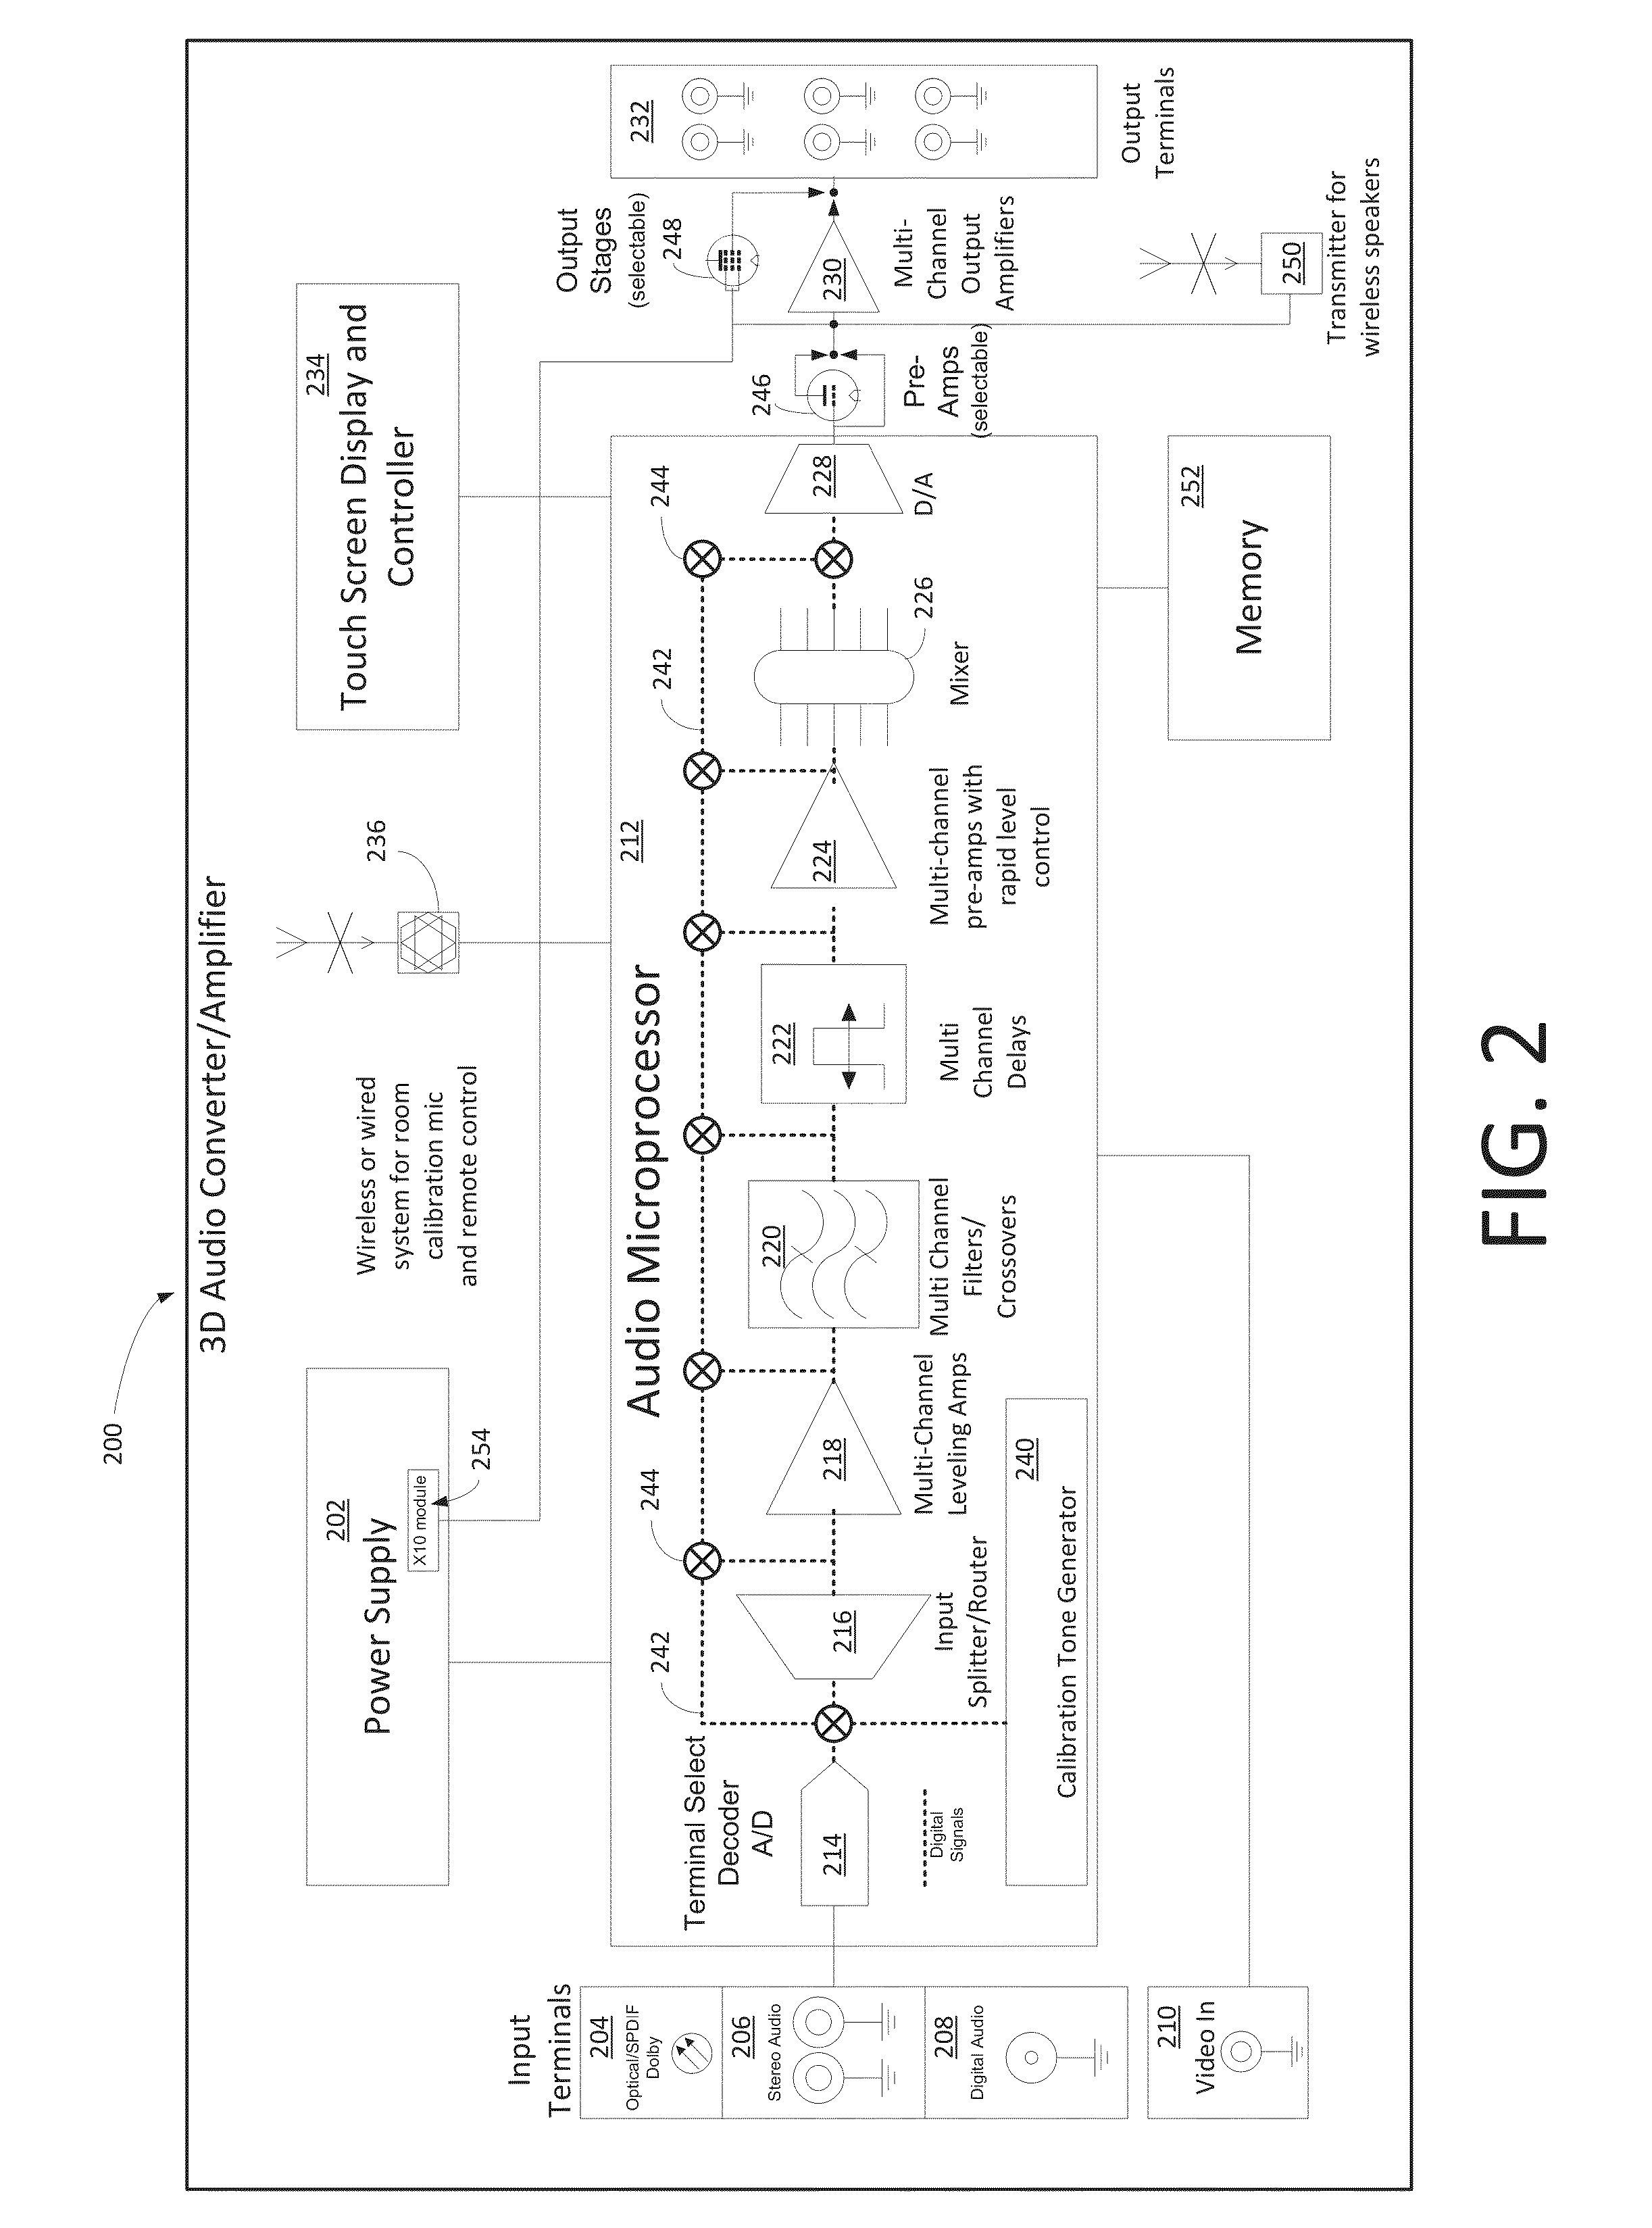 Systems, Methods, and Apparatus for Assigning Three-Dimensional Spatial Data to Sounds and Audio Files